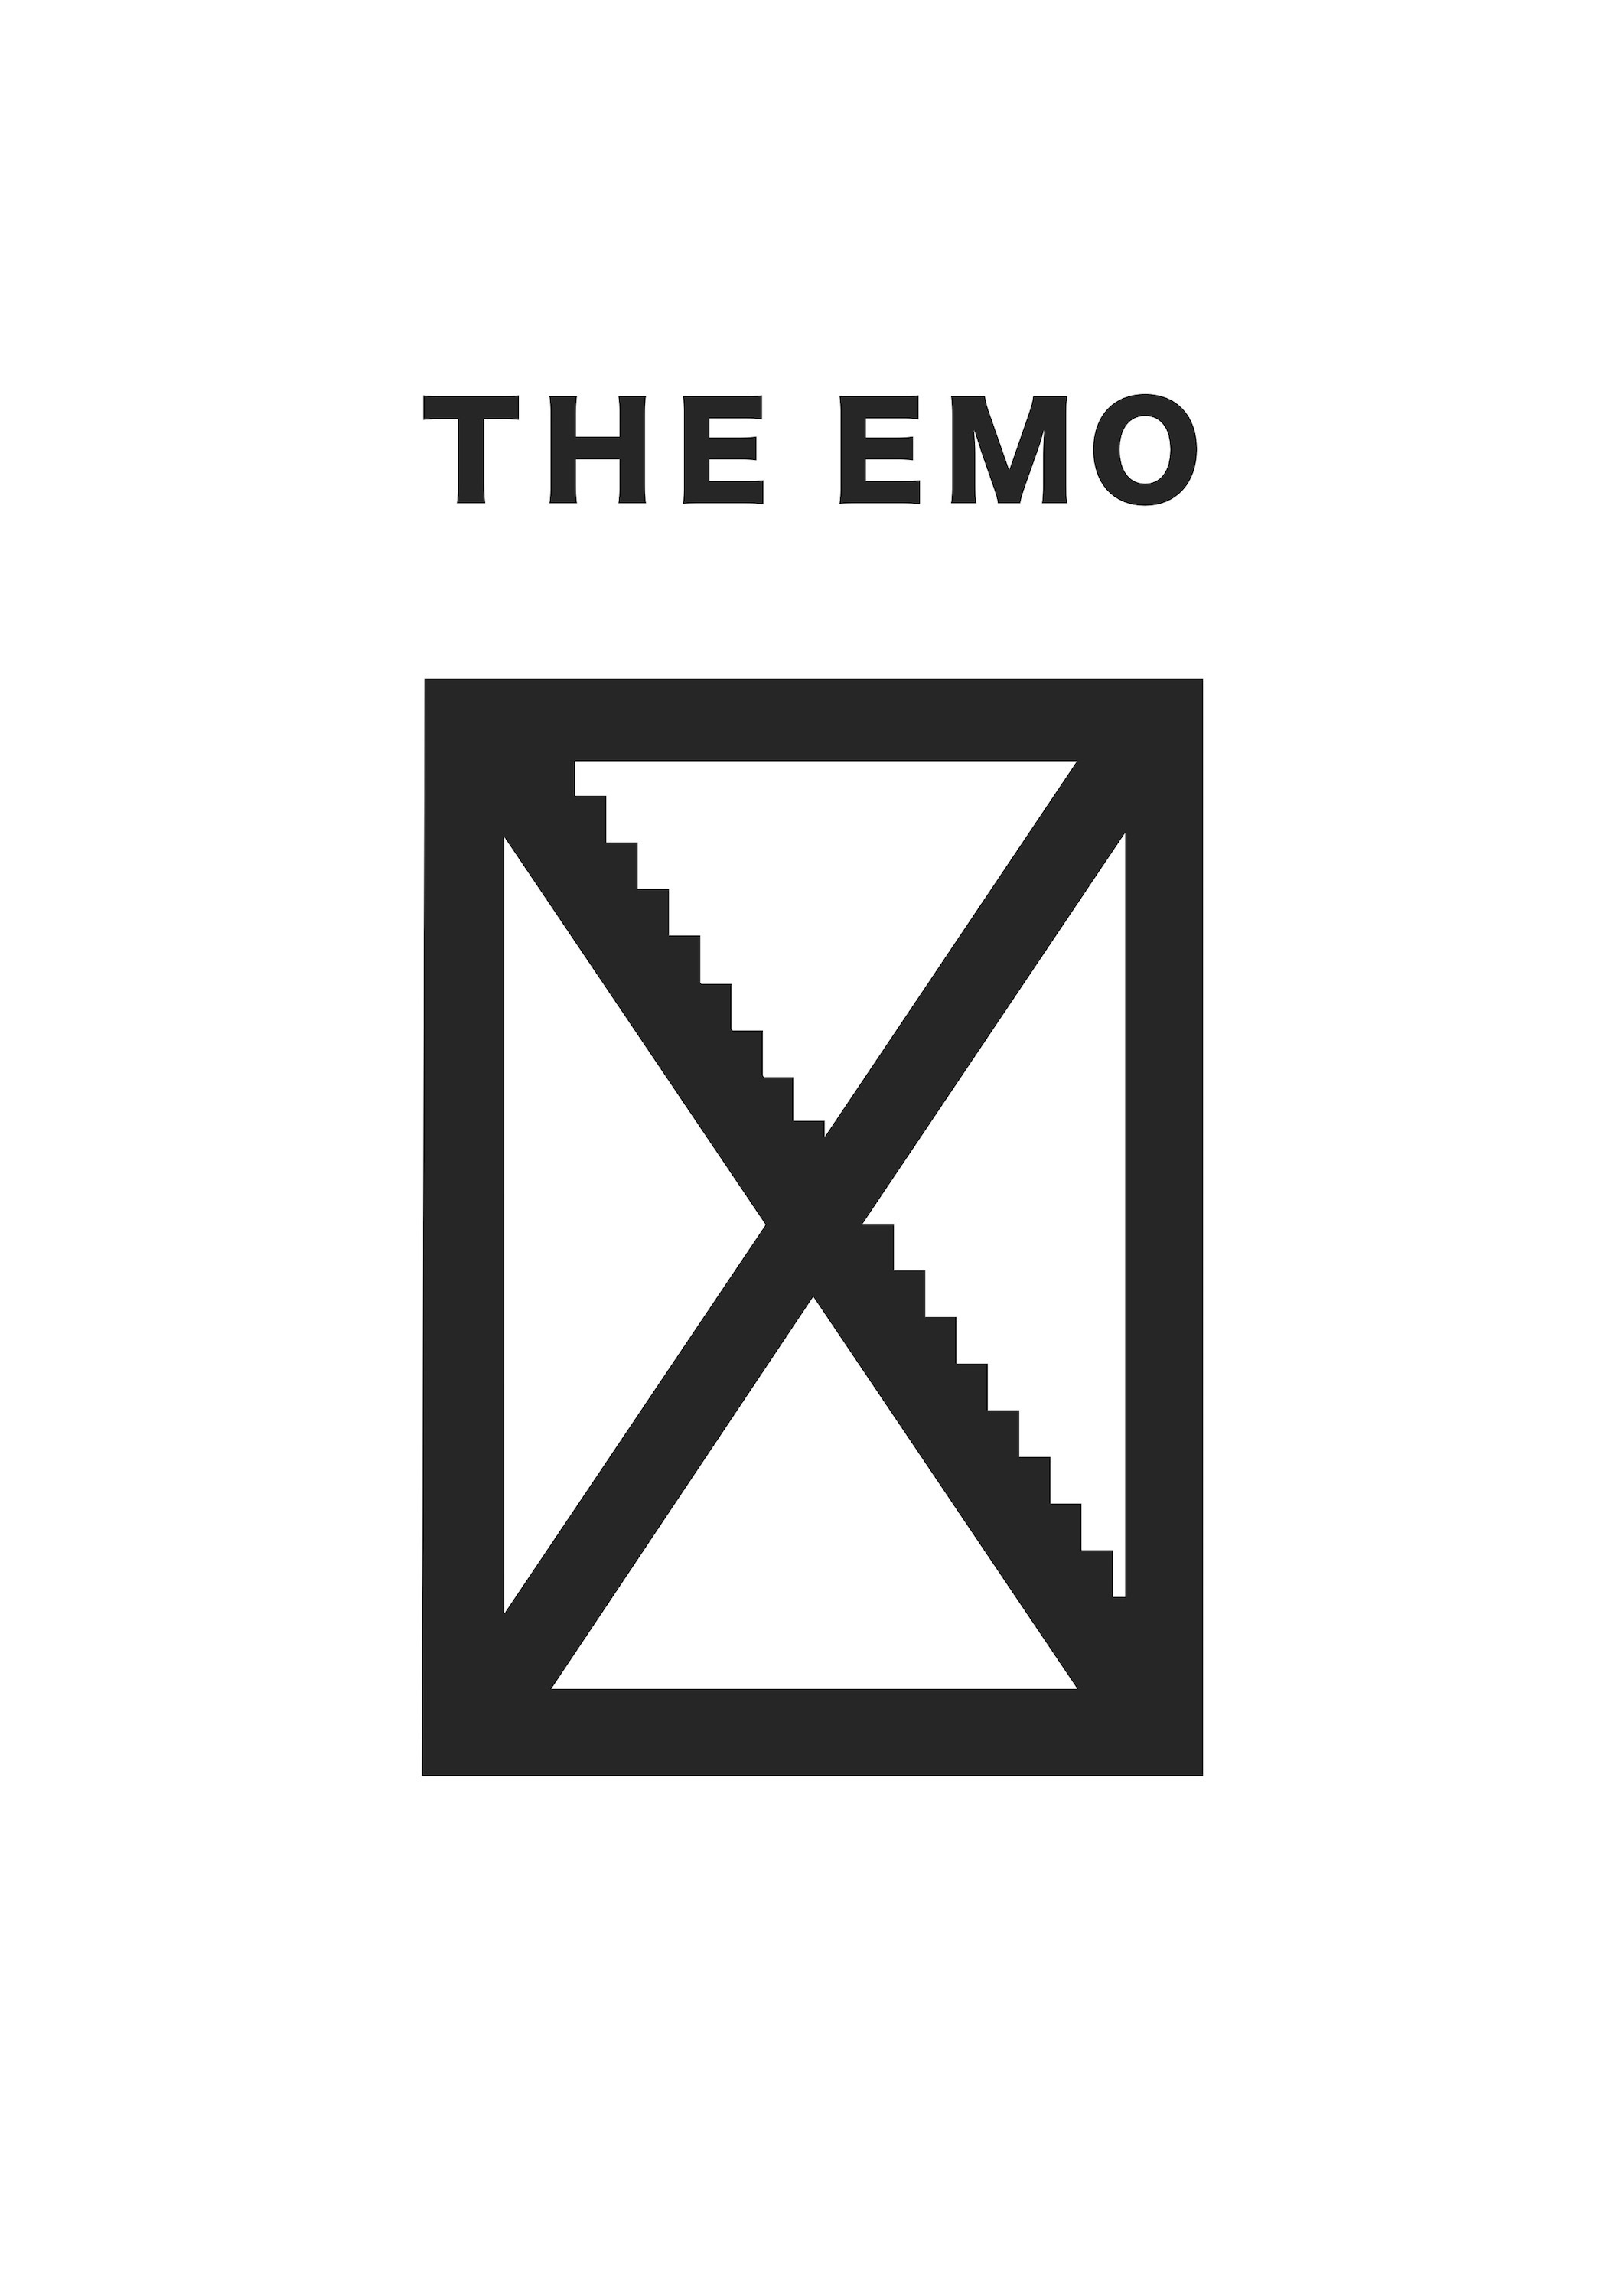 THE EMO